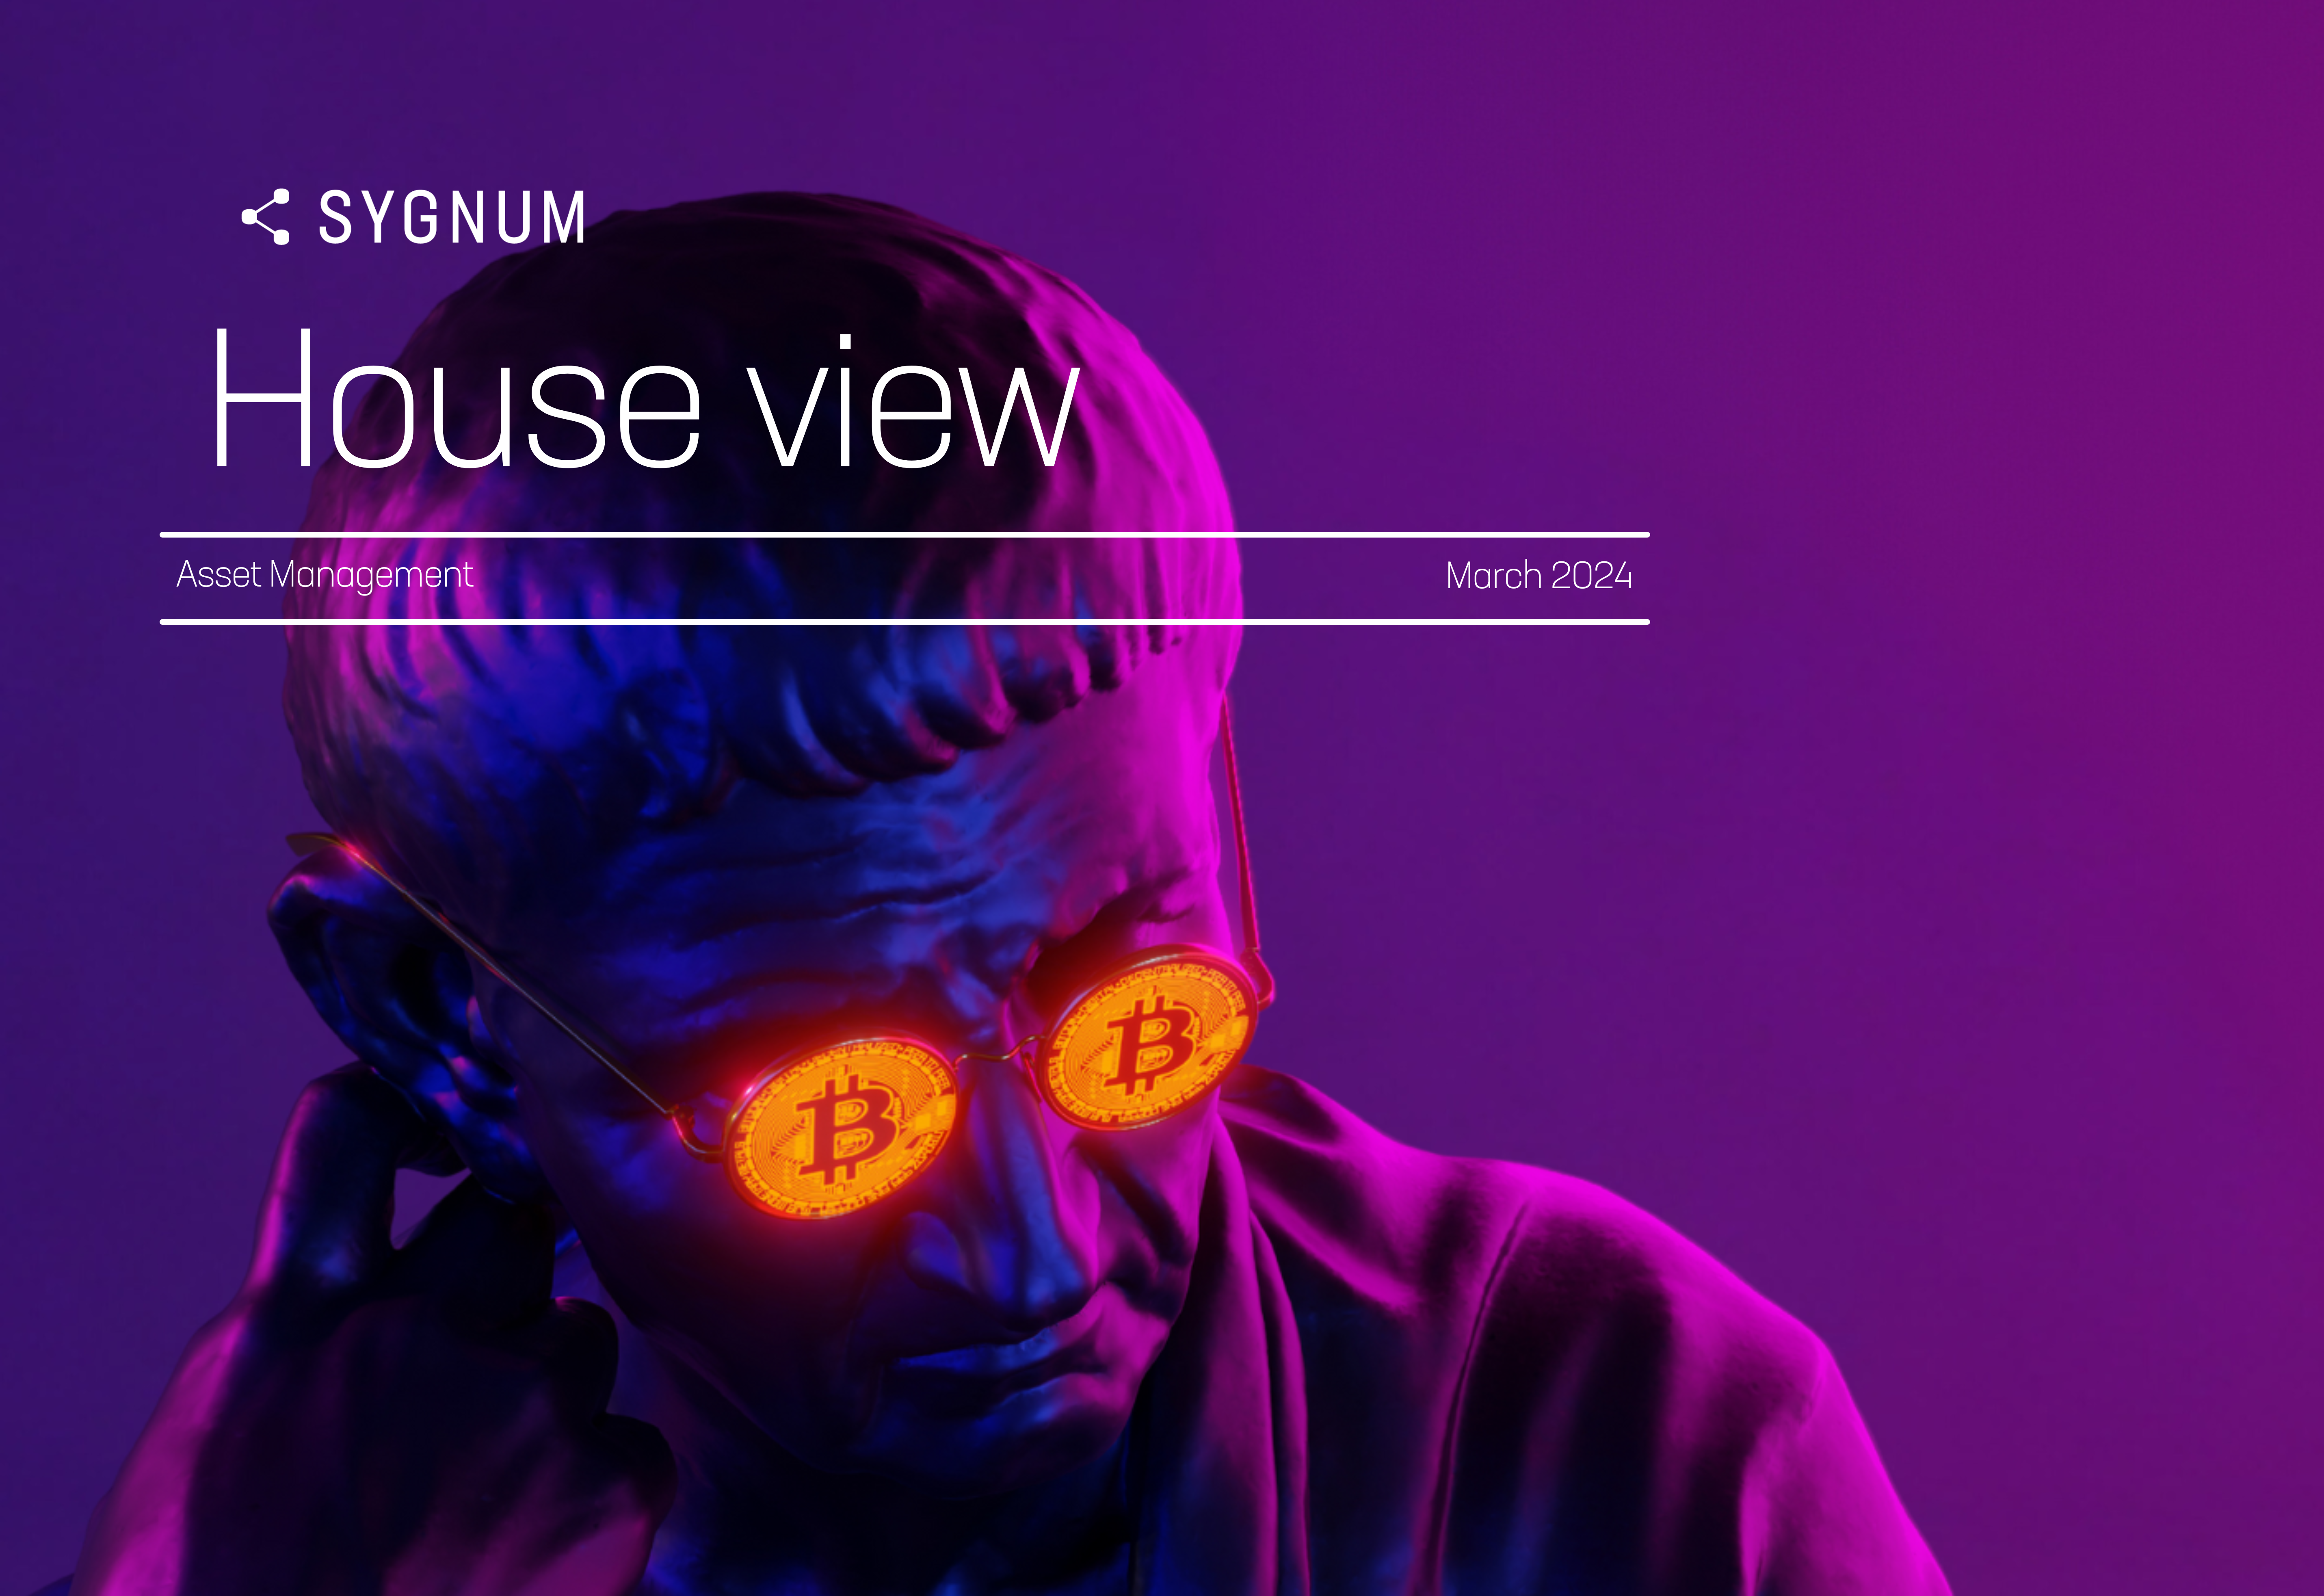 Sygnum House View March 2024